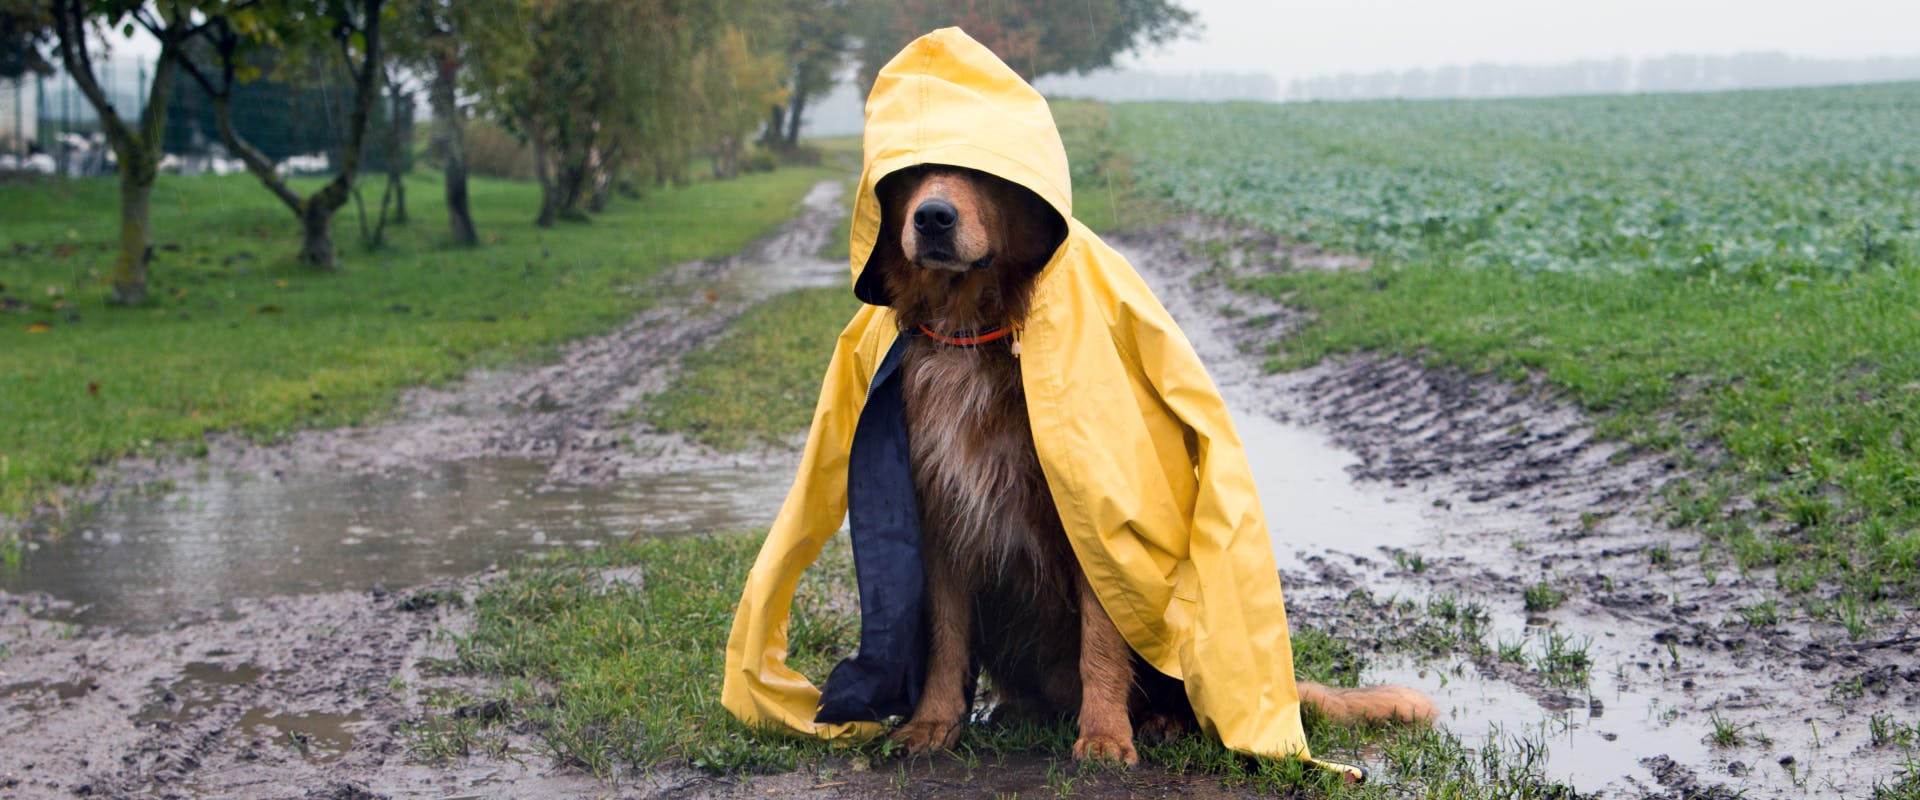 golden retriever sat in a puddle with a yellow rain coat over it in the rain